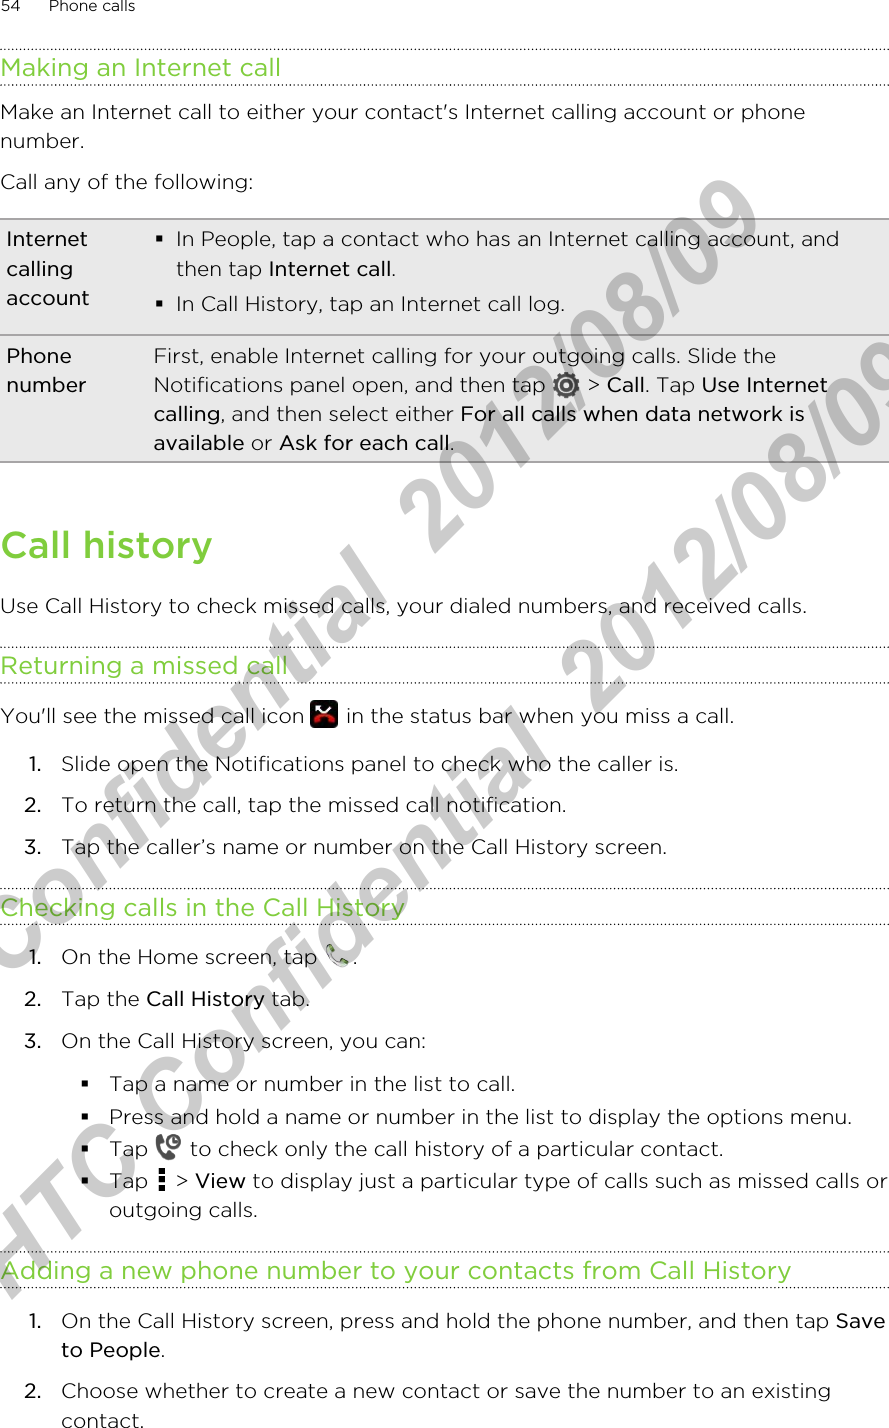 Making an Internet callMake an Internet call to either your contact&apos;s Internet calling account or phonenumber.Call any of the following:Internetcallingaccount§In People, tap a contact who has an Internet calling account, andthen tap Internet call.§In Call History, tap an Internet call log.PhonenumberFirst, enable Internet calling for your outgoing calls. Slide theNotifications panel open, and then tap   &gt; Call. Tap Use Internetcalling, and then select either For all calls when data network isavailable or Ask for each call.Call historyUse Call History to check missed calls, your dialed numbers, and received calls.Returning a missed callYou&apos;ll see the missed call icon   in the status bar when you miss a call.1. Slide open the Notifications panel to check who the caller is.2. To return the call, tap the missed call notification.3. Tap the caller’s name or number on the Call History screen.Checking calls in the Call History1. On the Home screen, tap  .2. Tap the Call History tab.3. On the Call History screen, you can:§Tap a name or number in the list to call.§Press and hold a name or number in the list to display the options menu.§Tap   to check only the call history of a particular contact.§Tap   &gt; View to display just a particular type of calls such as missed calls oroutgoing calls.Adding a new phone number to your contacts from Call History1. On the Call History screen, press and hold the phone number, and then tap Saveto People.2. Choose whether to create a new contact or save the number to an existingcontact.54 Phone callsHTC Confidential  2012/08/09  HTC Confidential  2012/08/09 